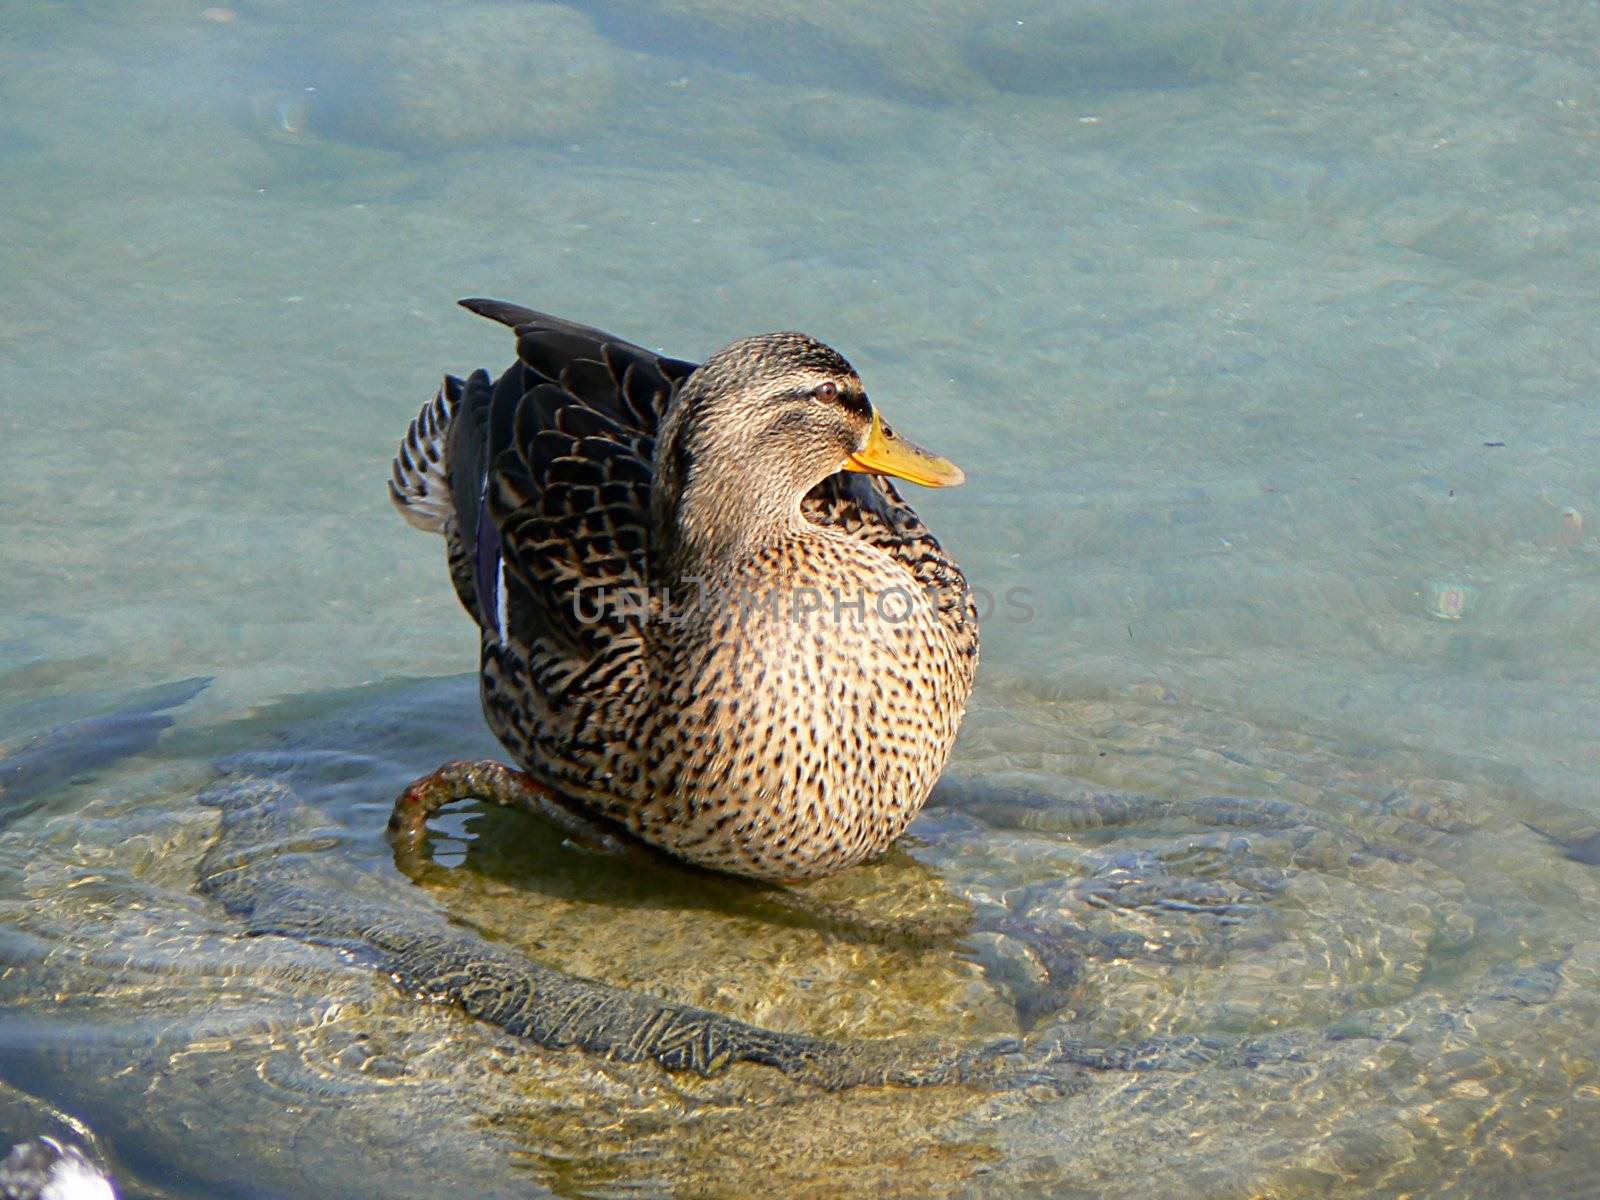 A duck on a stone in the water